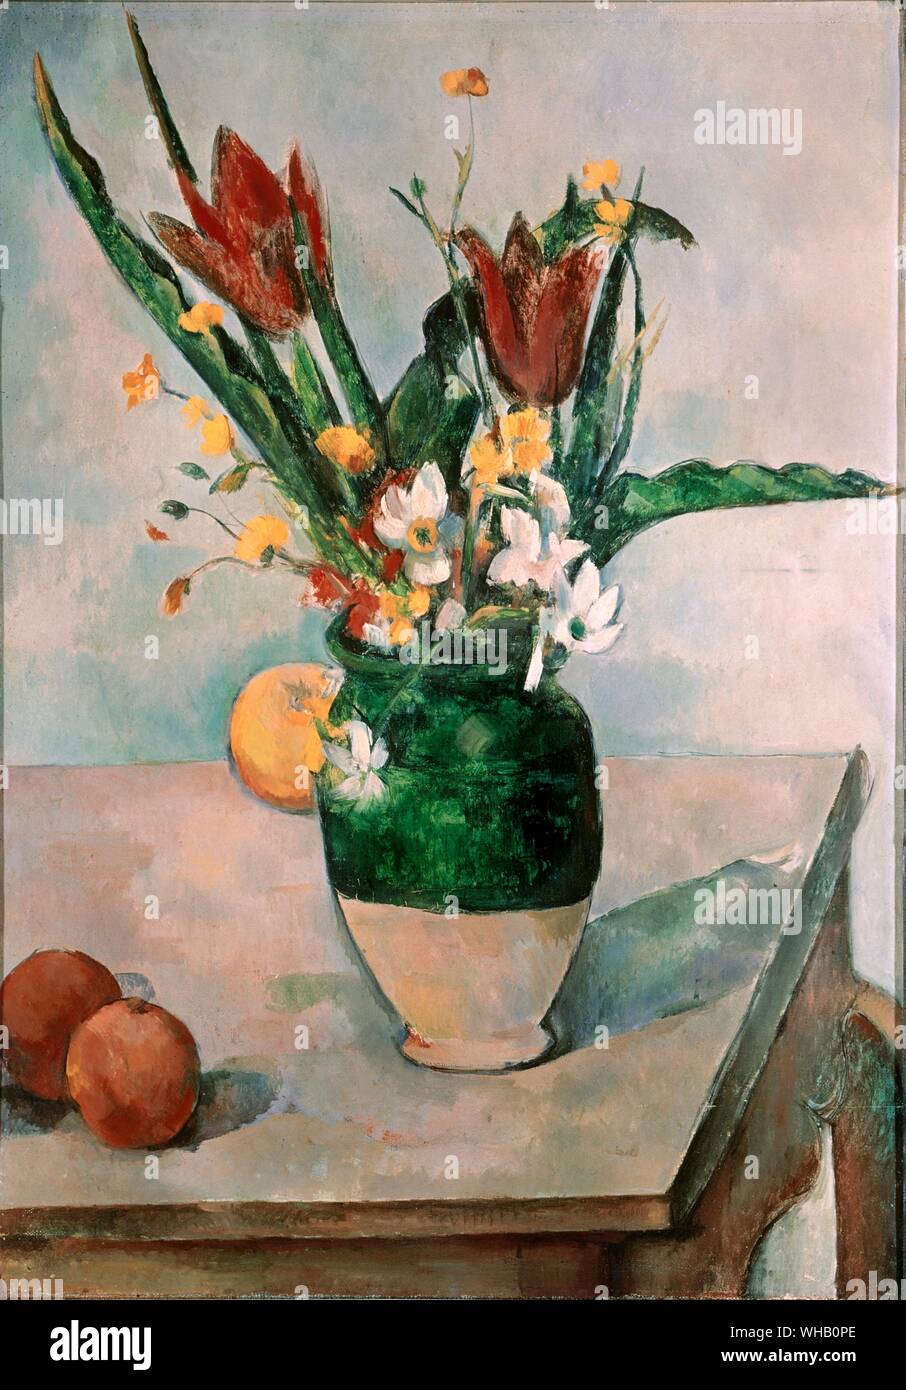 Vase of Tulips c.1890-94. by Paul Cezanne. Paul Cézanne (January 19, 1839 - October 22, 1906) was a French artist, a painter (Postimpressionist).. Stock Photo